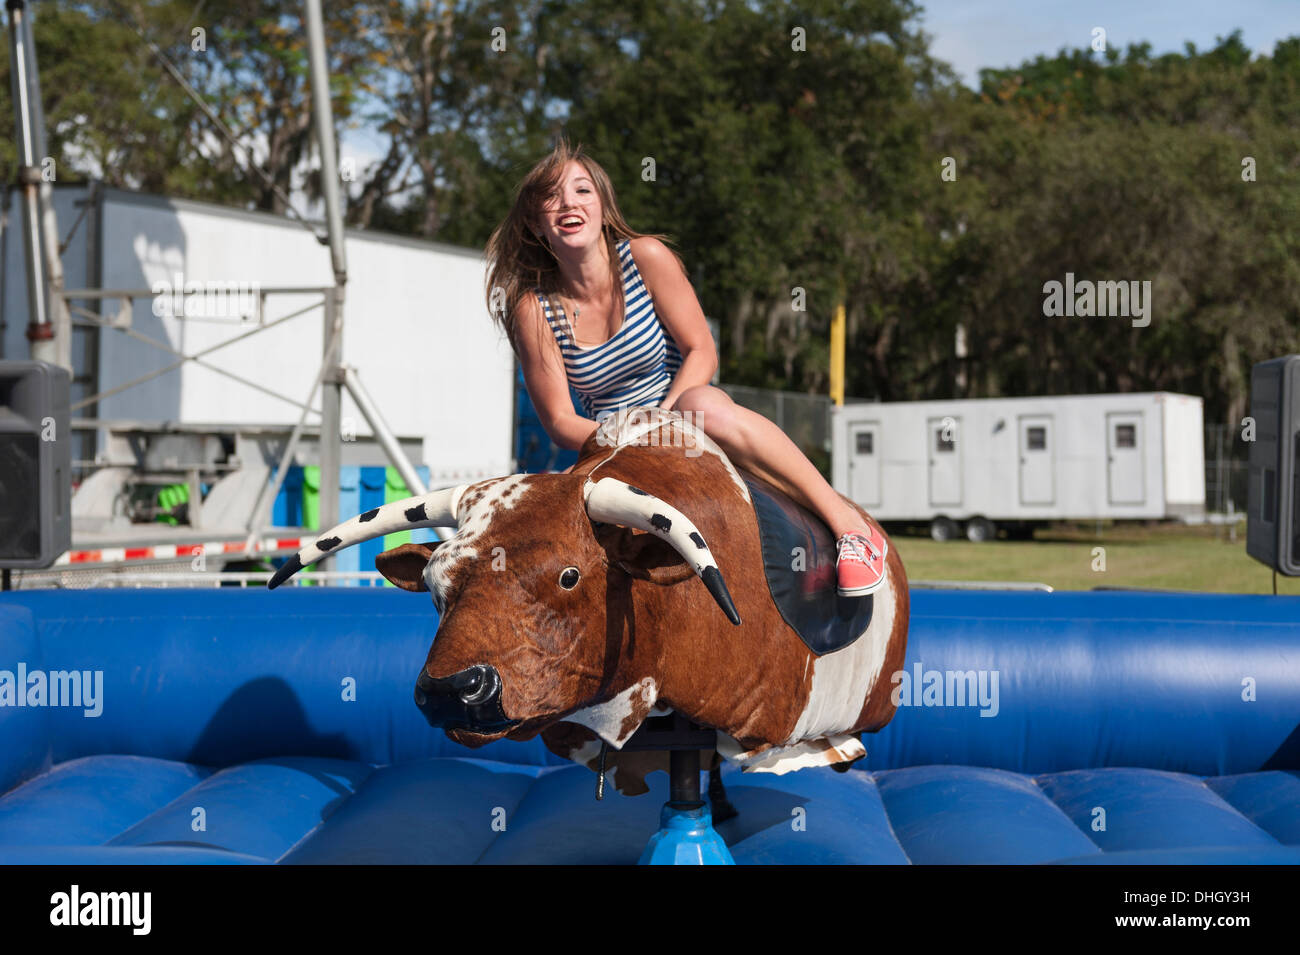 A teenager riding a mechanical Bull at a Carnival in Central Florida USA Stock Photo